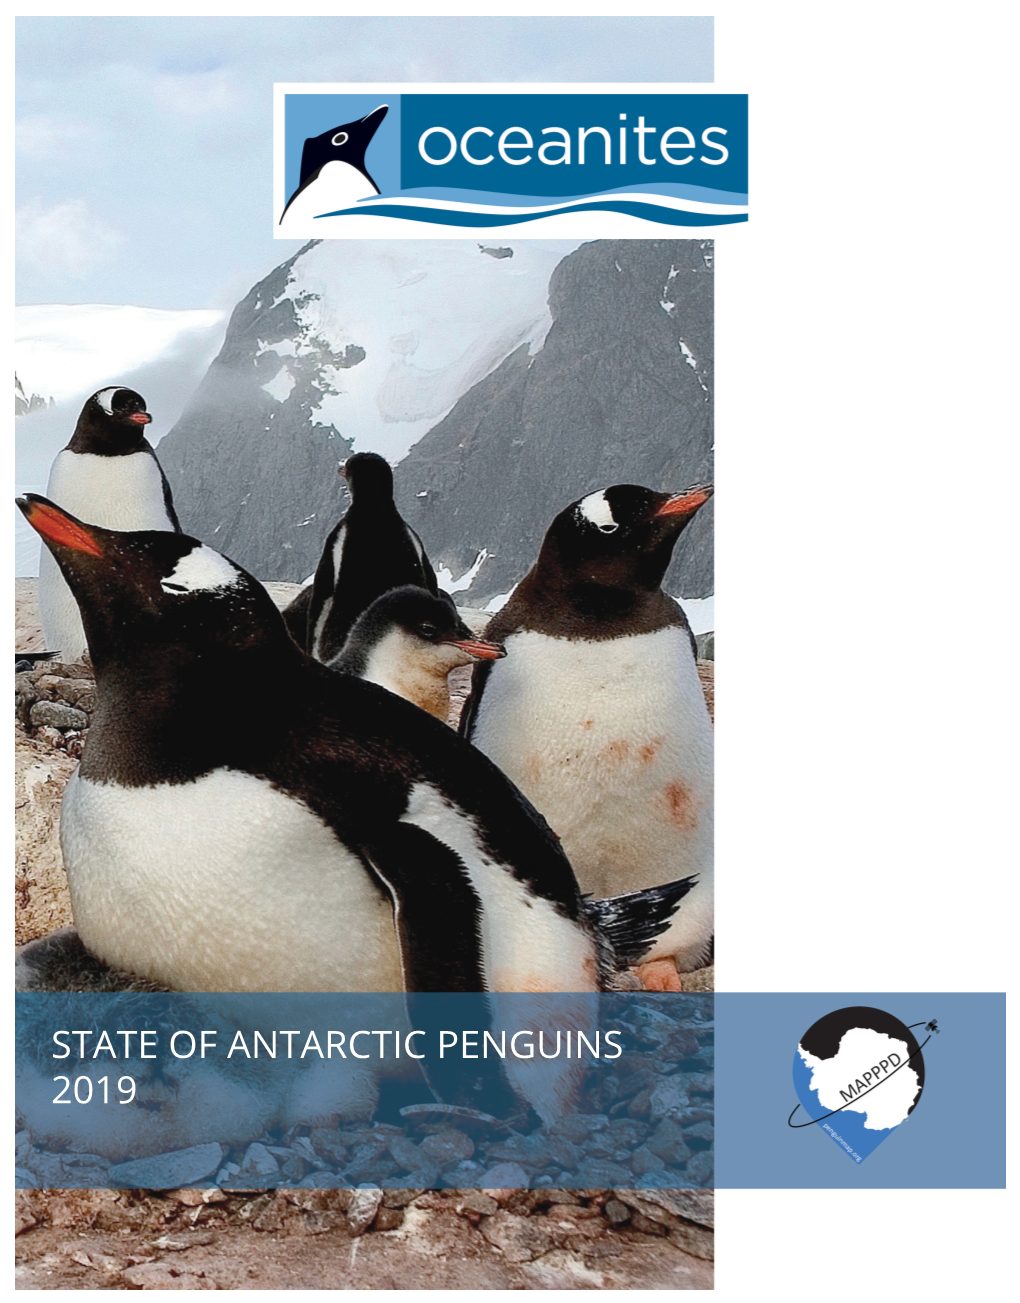 State of Antarctic Penguins 2019 State of Antarctic Penguins 2019